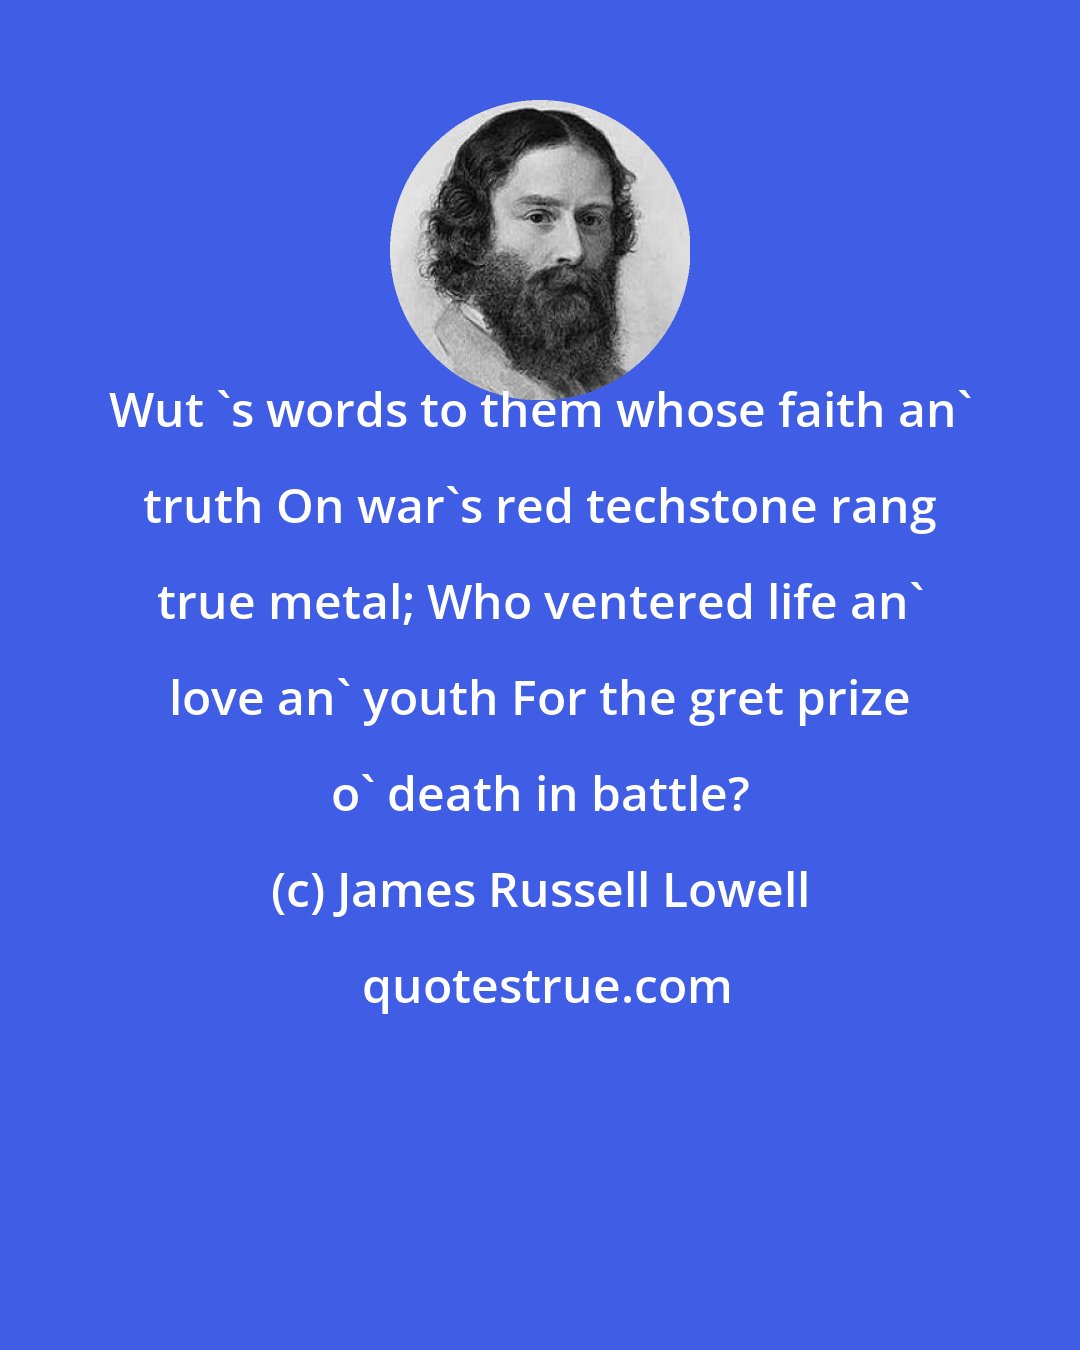 James Russell Lowell: Wut 's words to them whose faith an' truth On war's red techstone rang true metal; Who ventered life an' love an' youth For the gret prize o' death in battle?